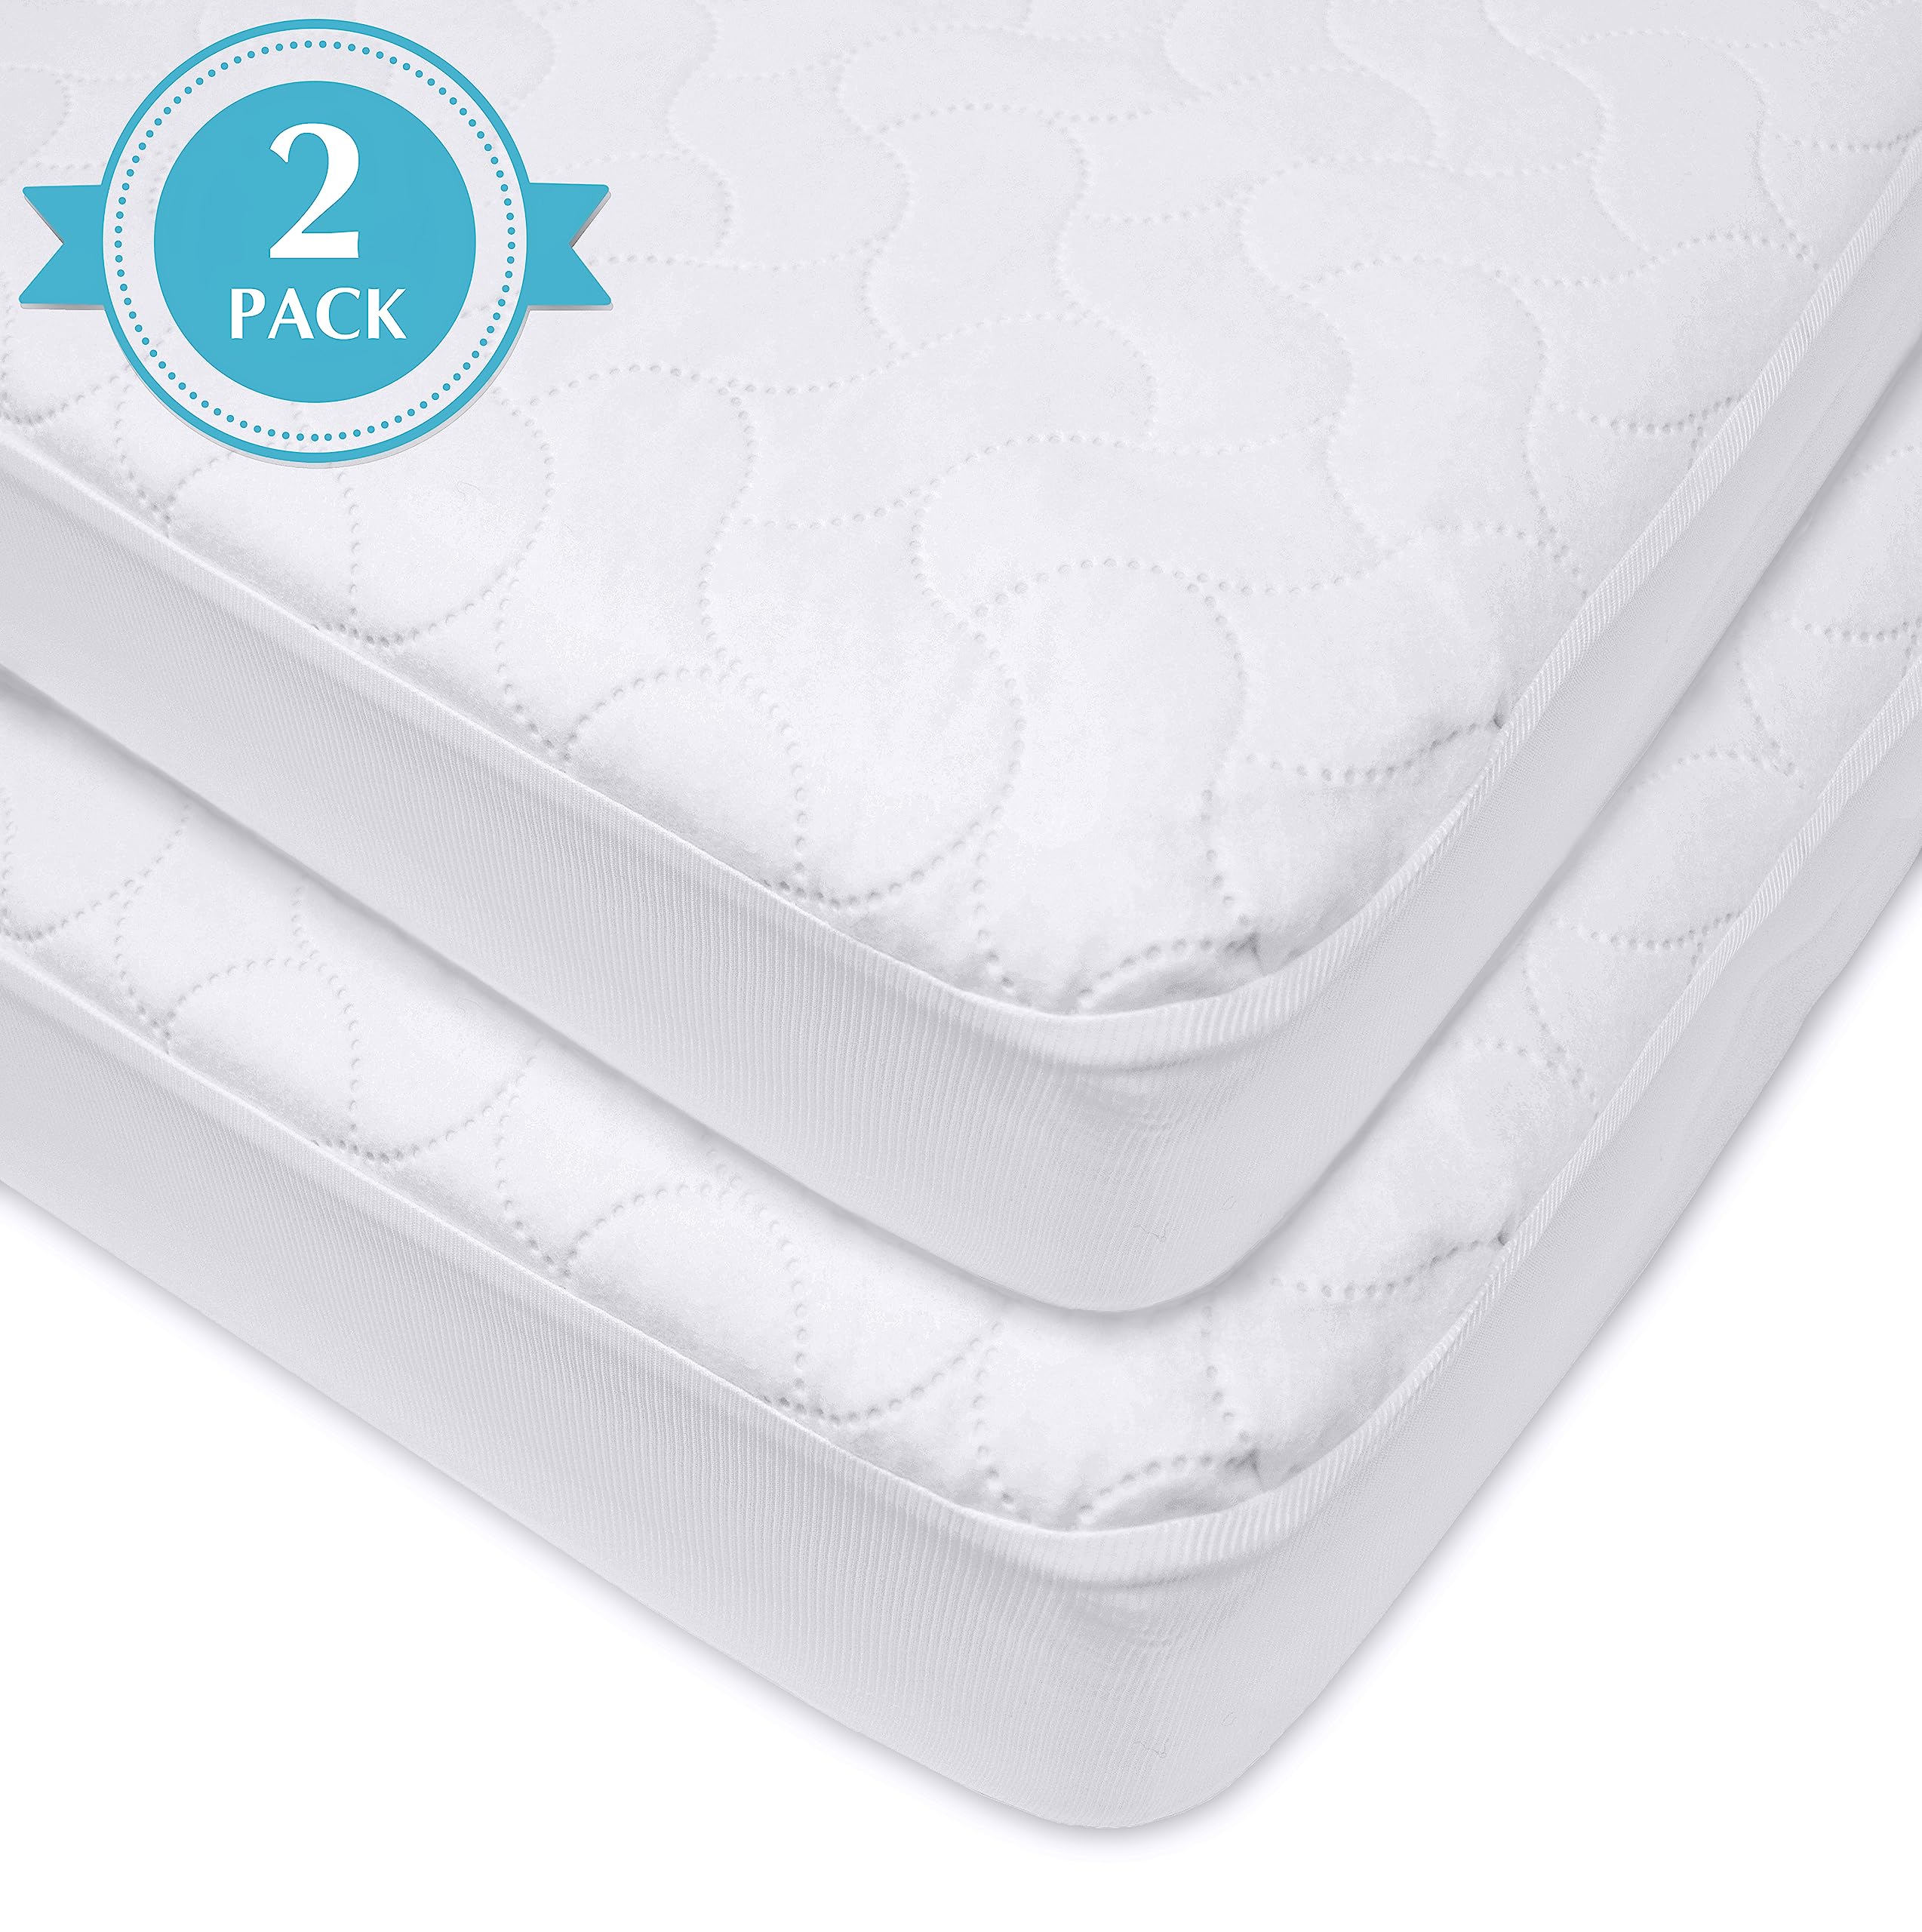 American Baby Company Waterproof Fitted Quilted Crib and Toddler Protective Pad Cover, White (Pack of 2), for Boys and Girls